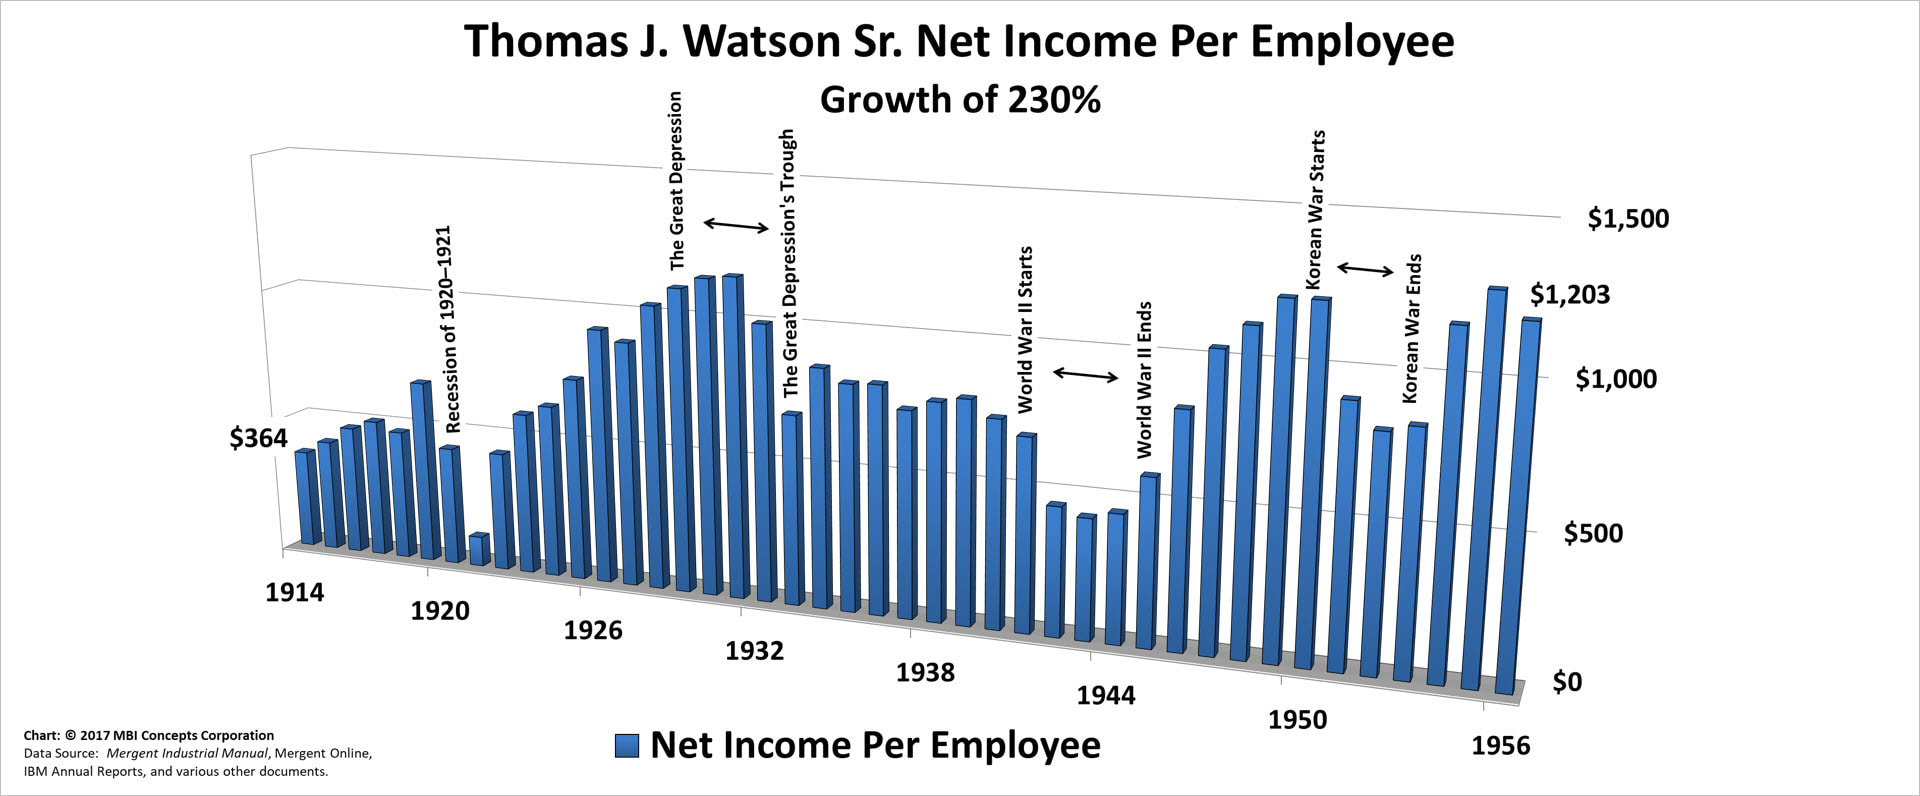 A color bar chart showing IBM's yearly net income (profit) per employee from 1915 to 1956 for IBM Chief Executive Officer Thomas J. Watson Sr.